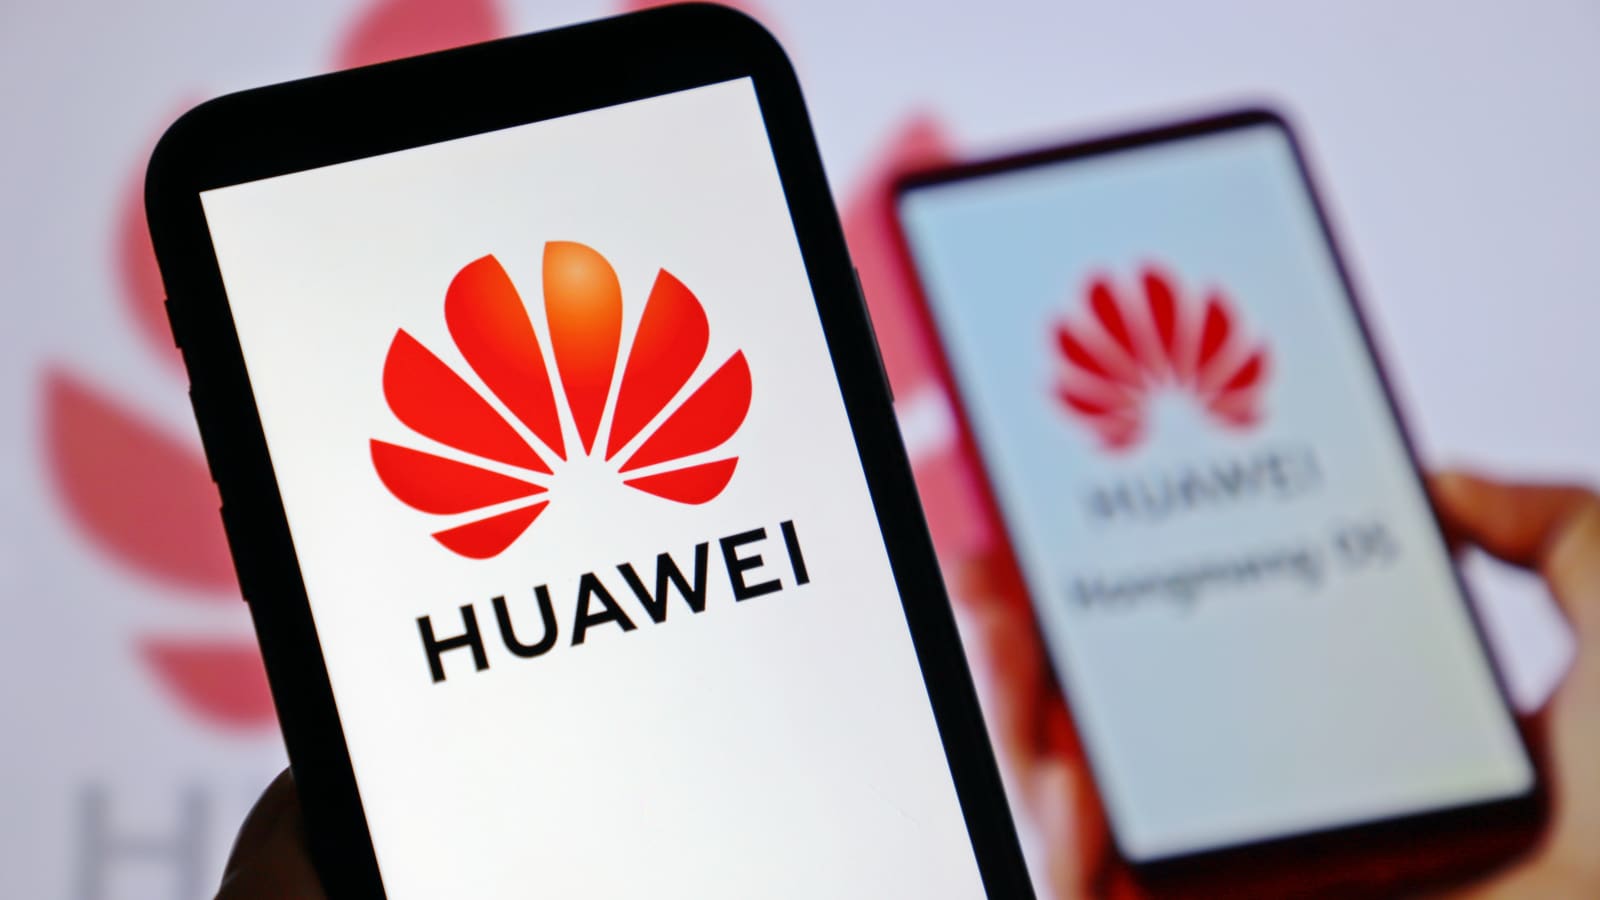 Huawei Chairman Says The Aim Is To Survive As Revenue Slides 29